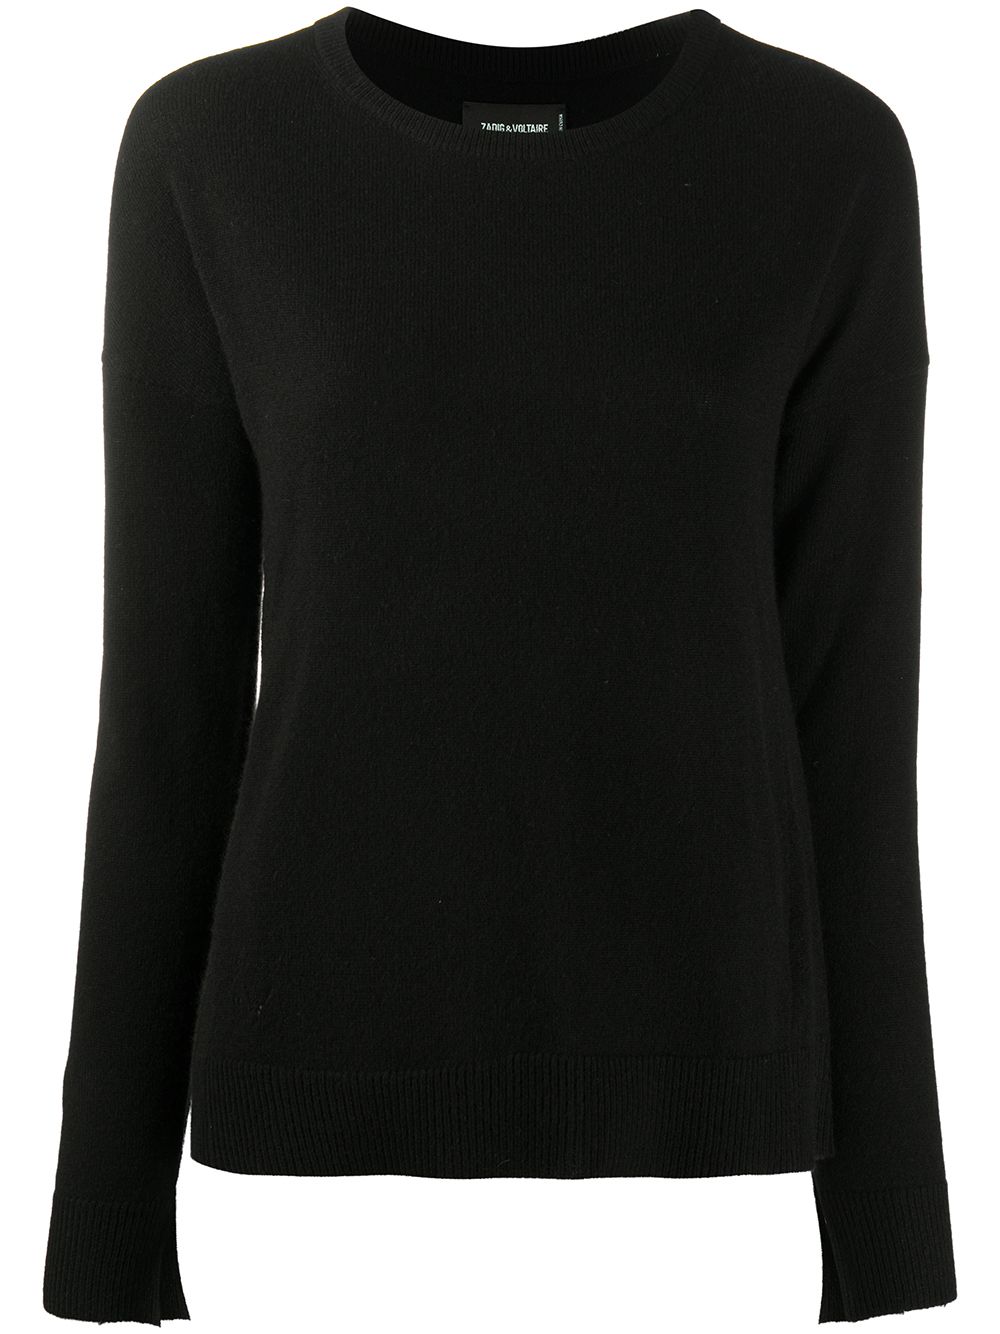 Image 1 of Zadig&Voltaire star-patch knitted jumper